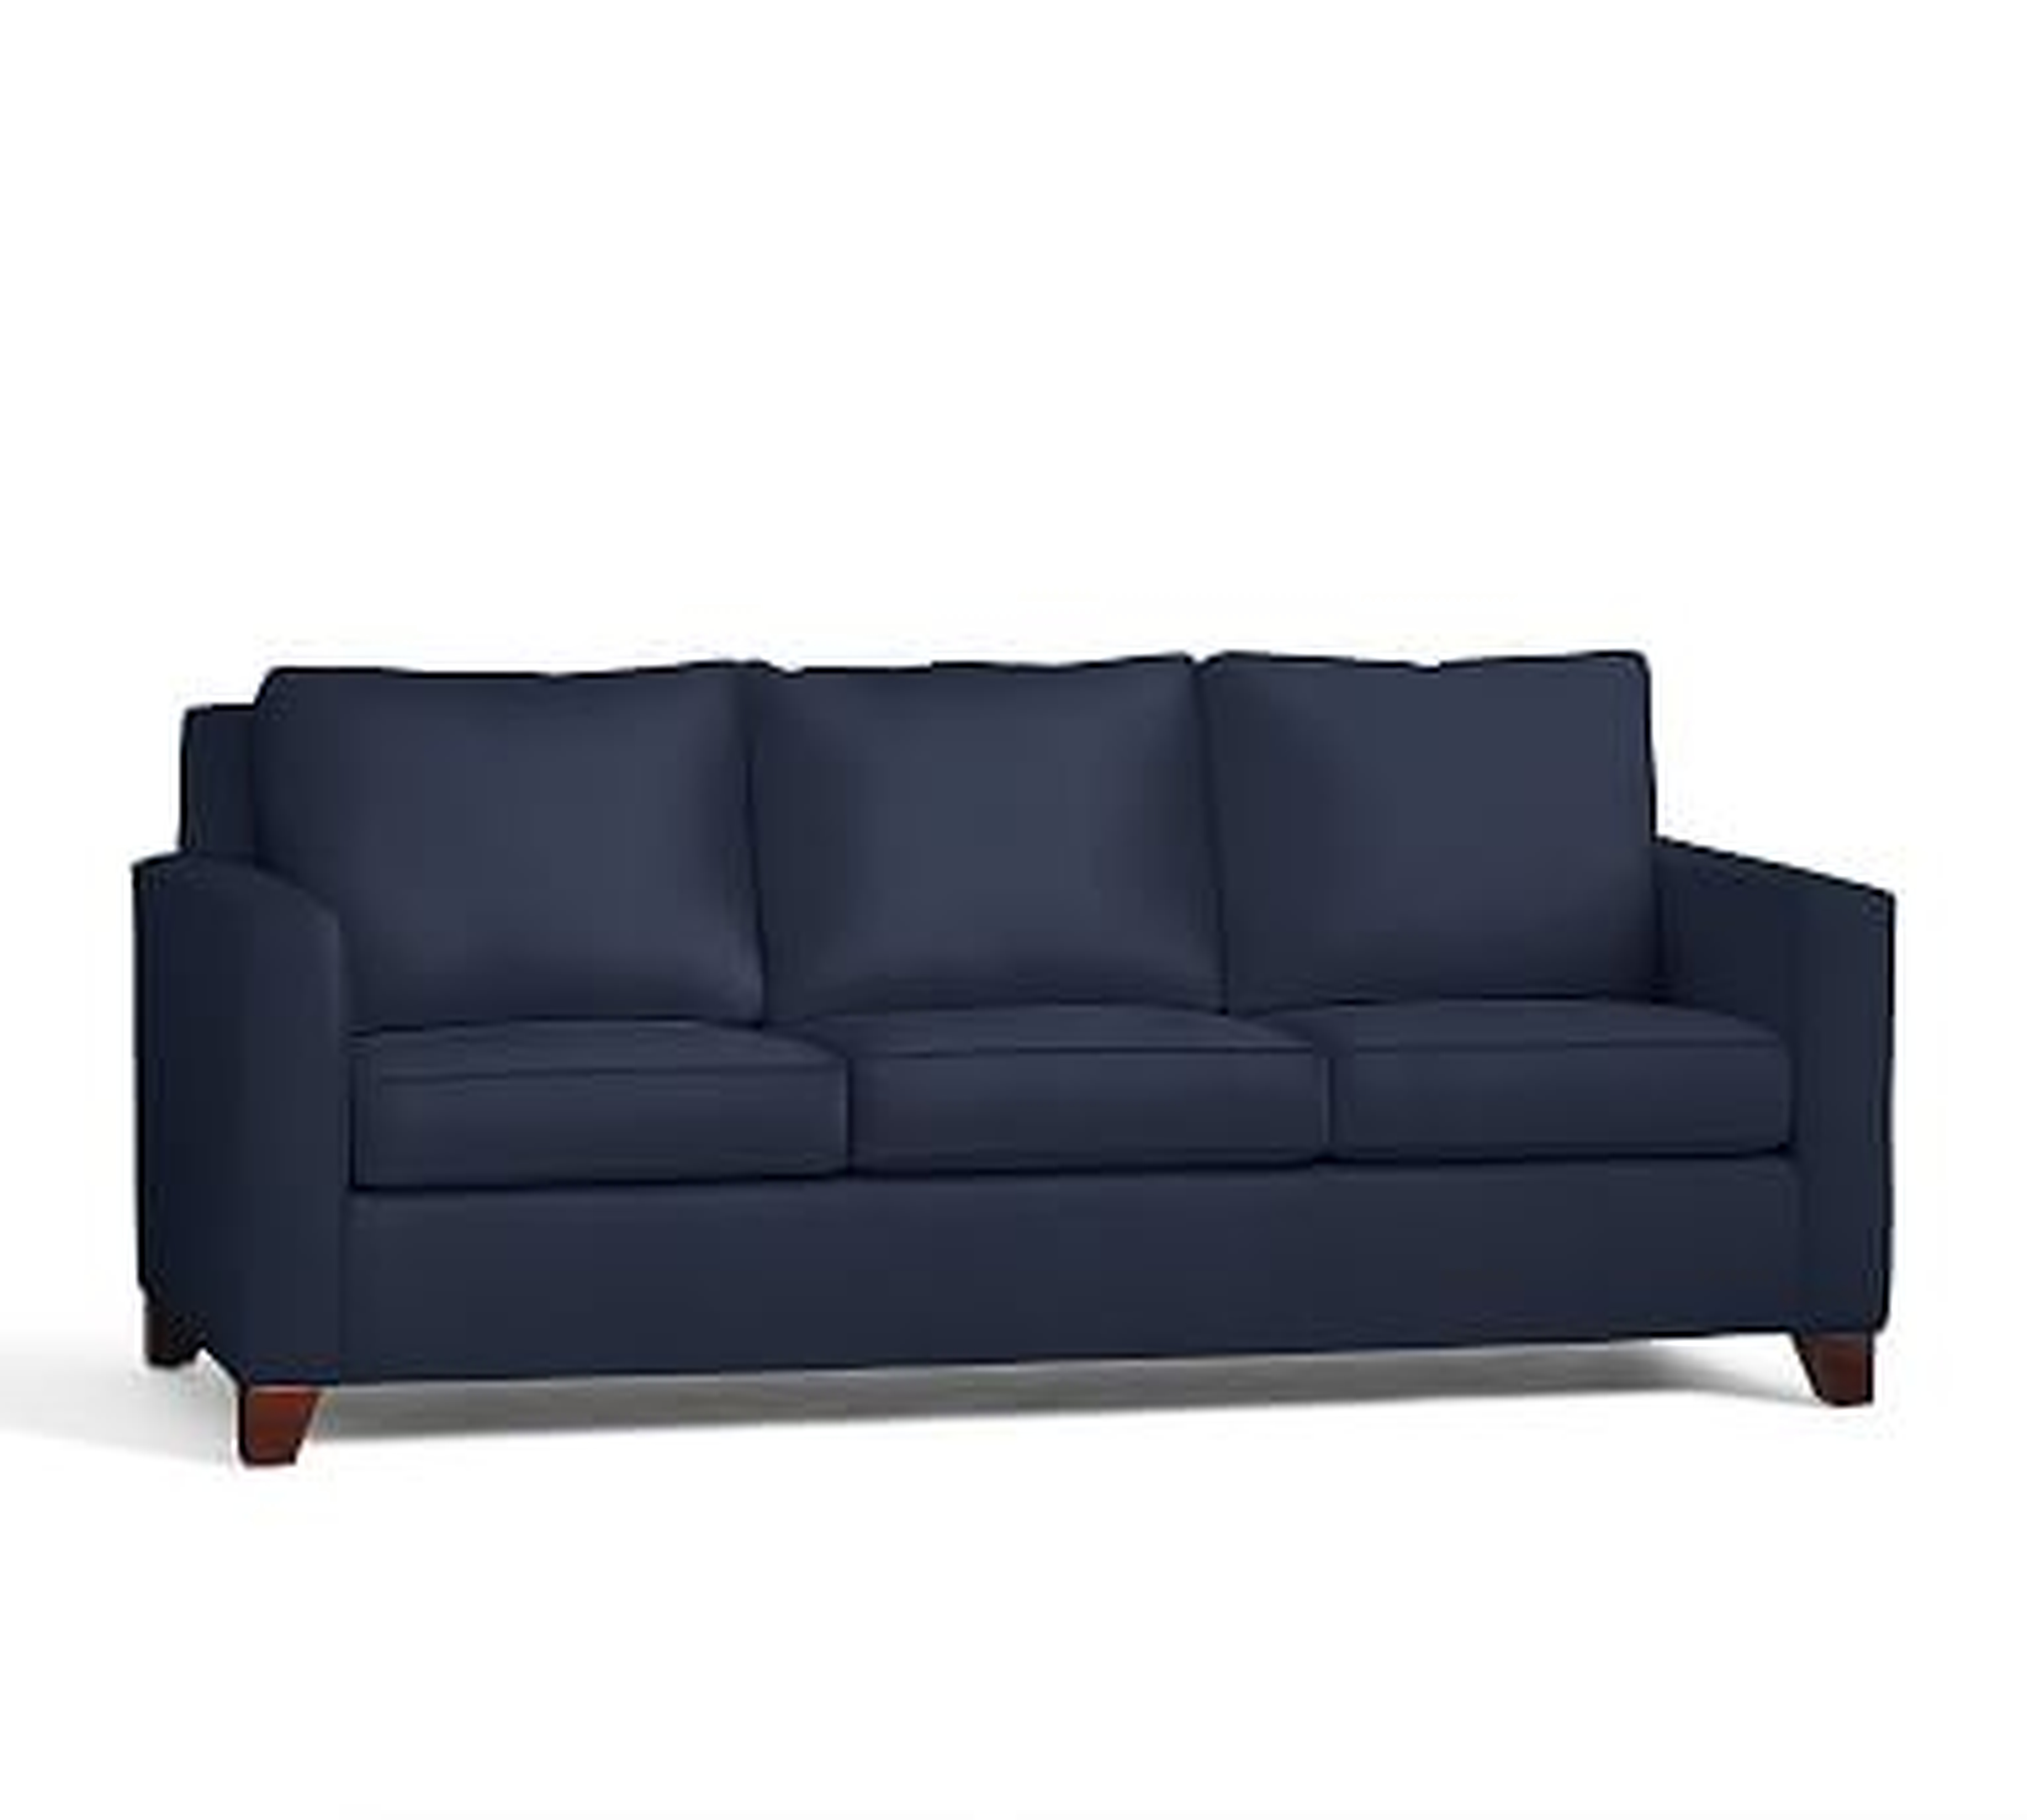 Cameron Square Arm Upholstered Sofa 86" 3-Seater, Polyester Wrapped Cushions, Twill Cadet Navy - Pottery Barn